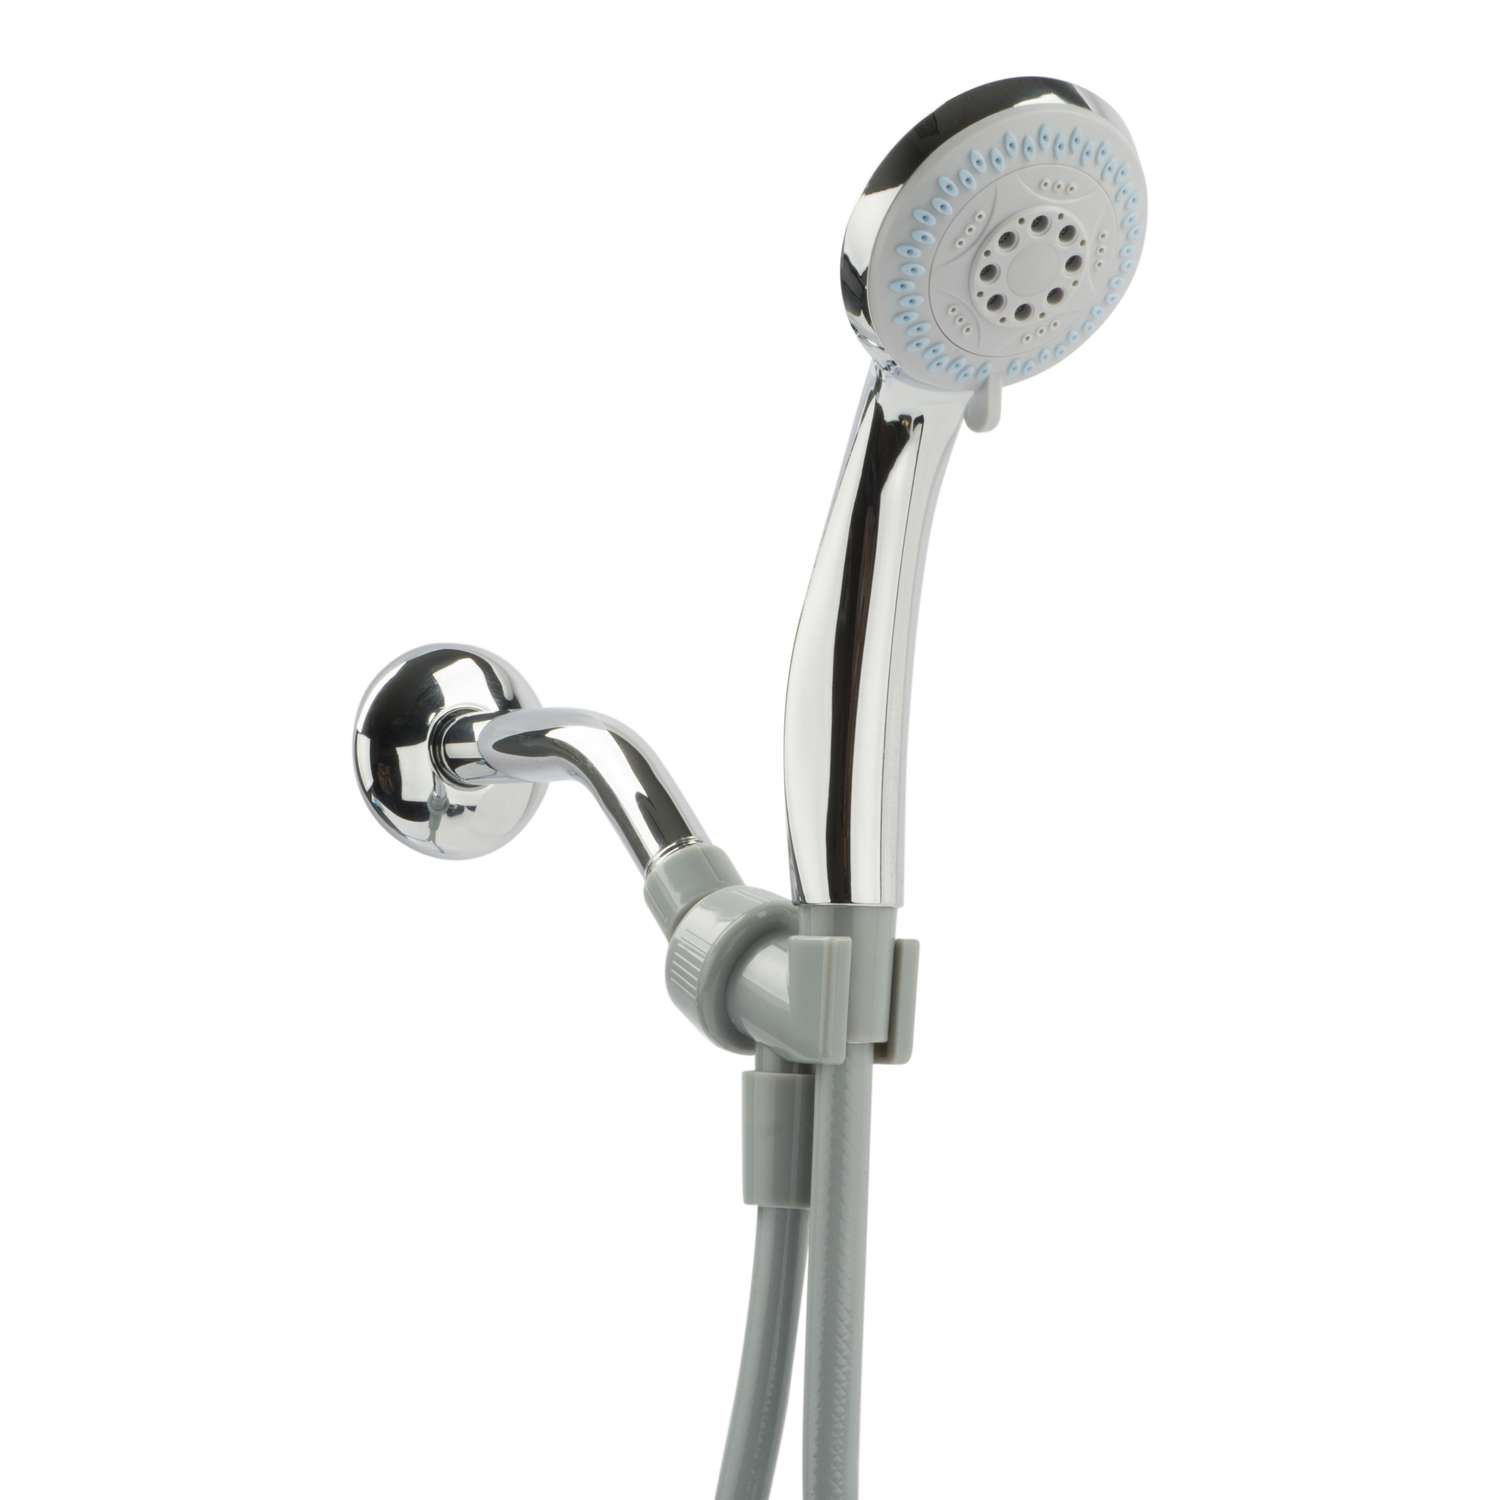 Hand Held Shower Head 3 Function with Hose Chrome Finish #4705471 